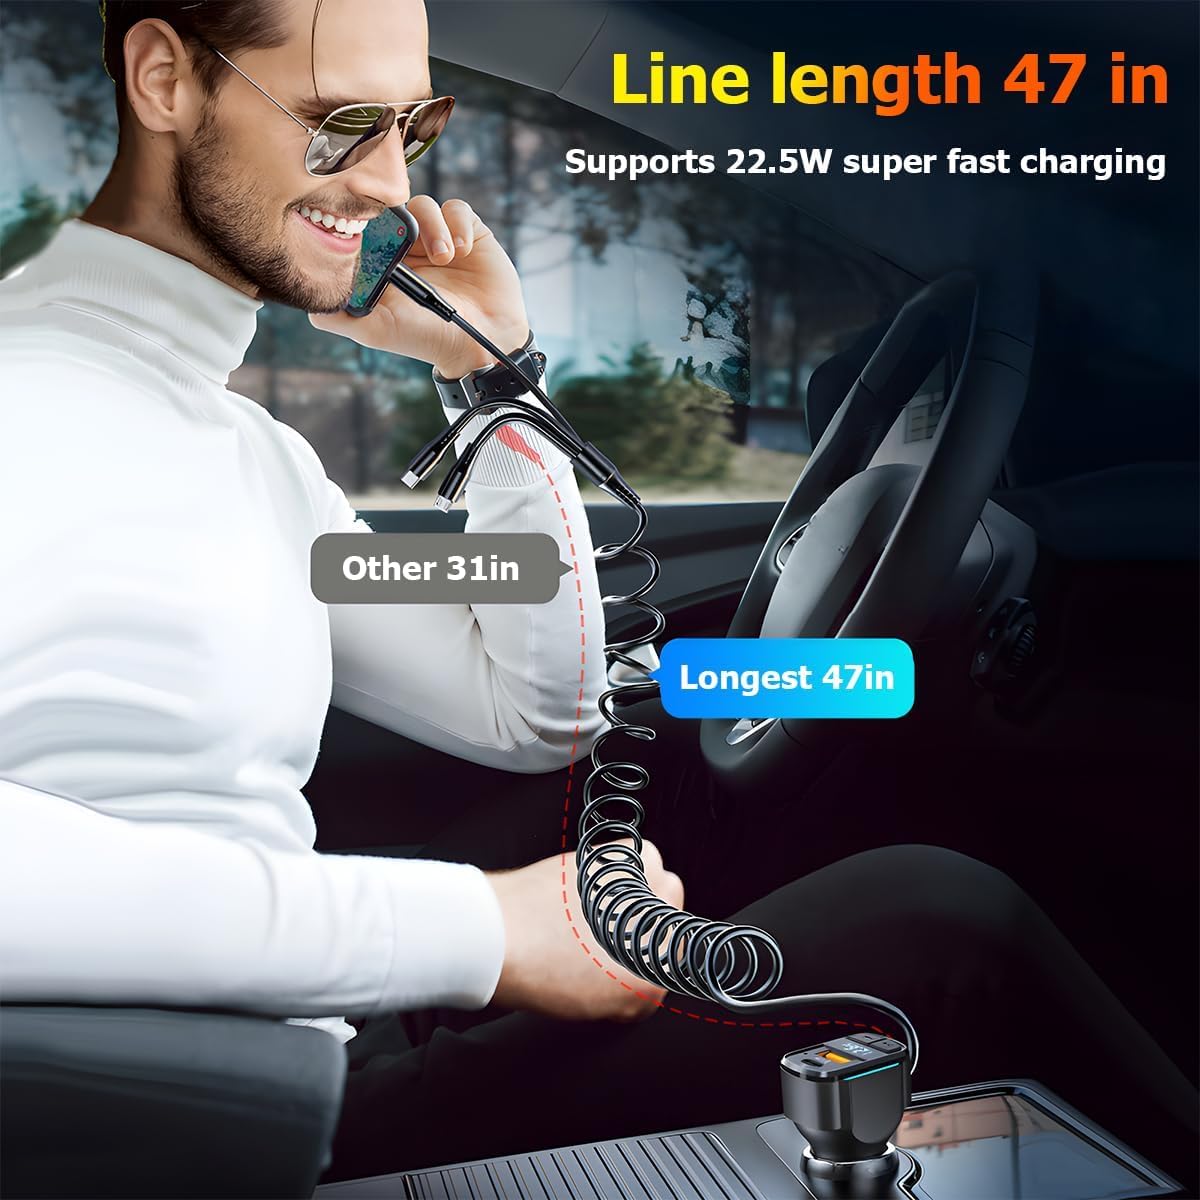 ADZOY USB C Car Charger, 3-Port Fast Car Charger PD3.0 & QC3.0 with LED Digital Display, Cigarette Lighter Fast Charging Adapter Compatible with iPhone Android Most Cell Phones (with Coiled Cable)